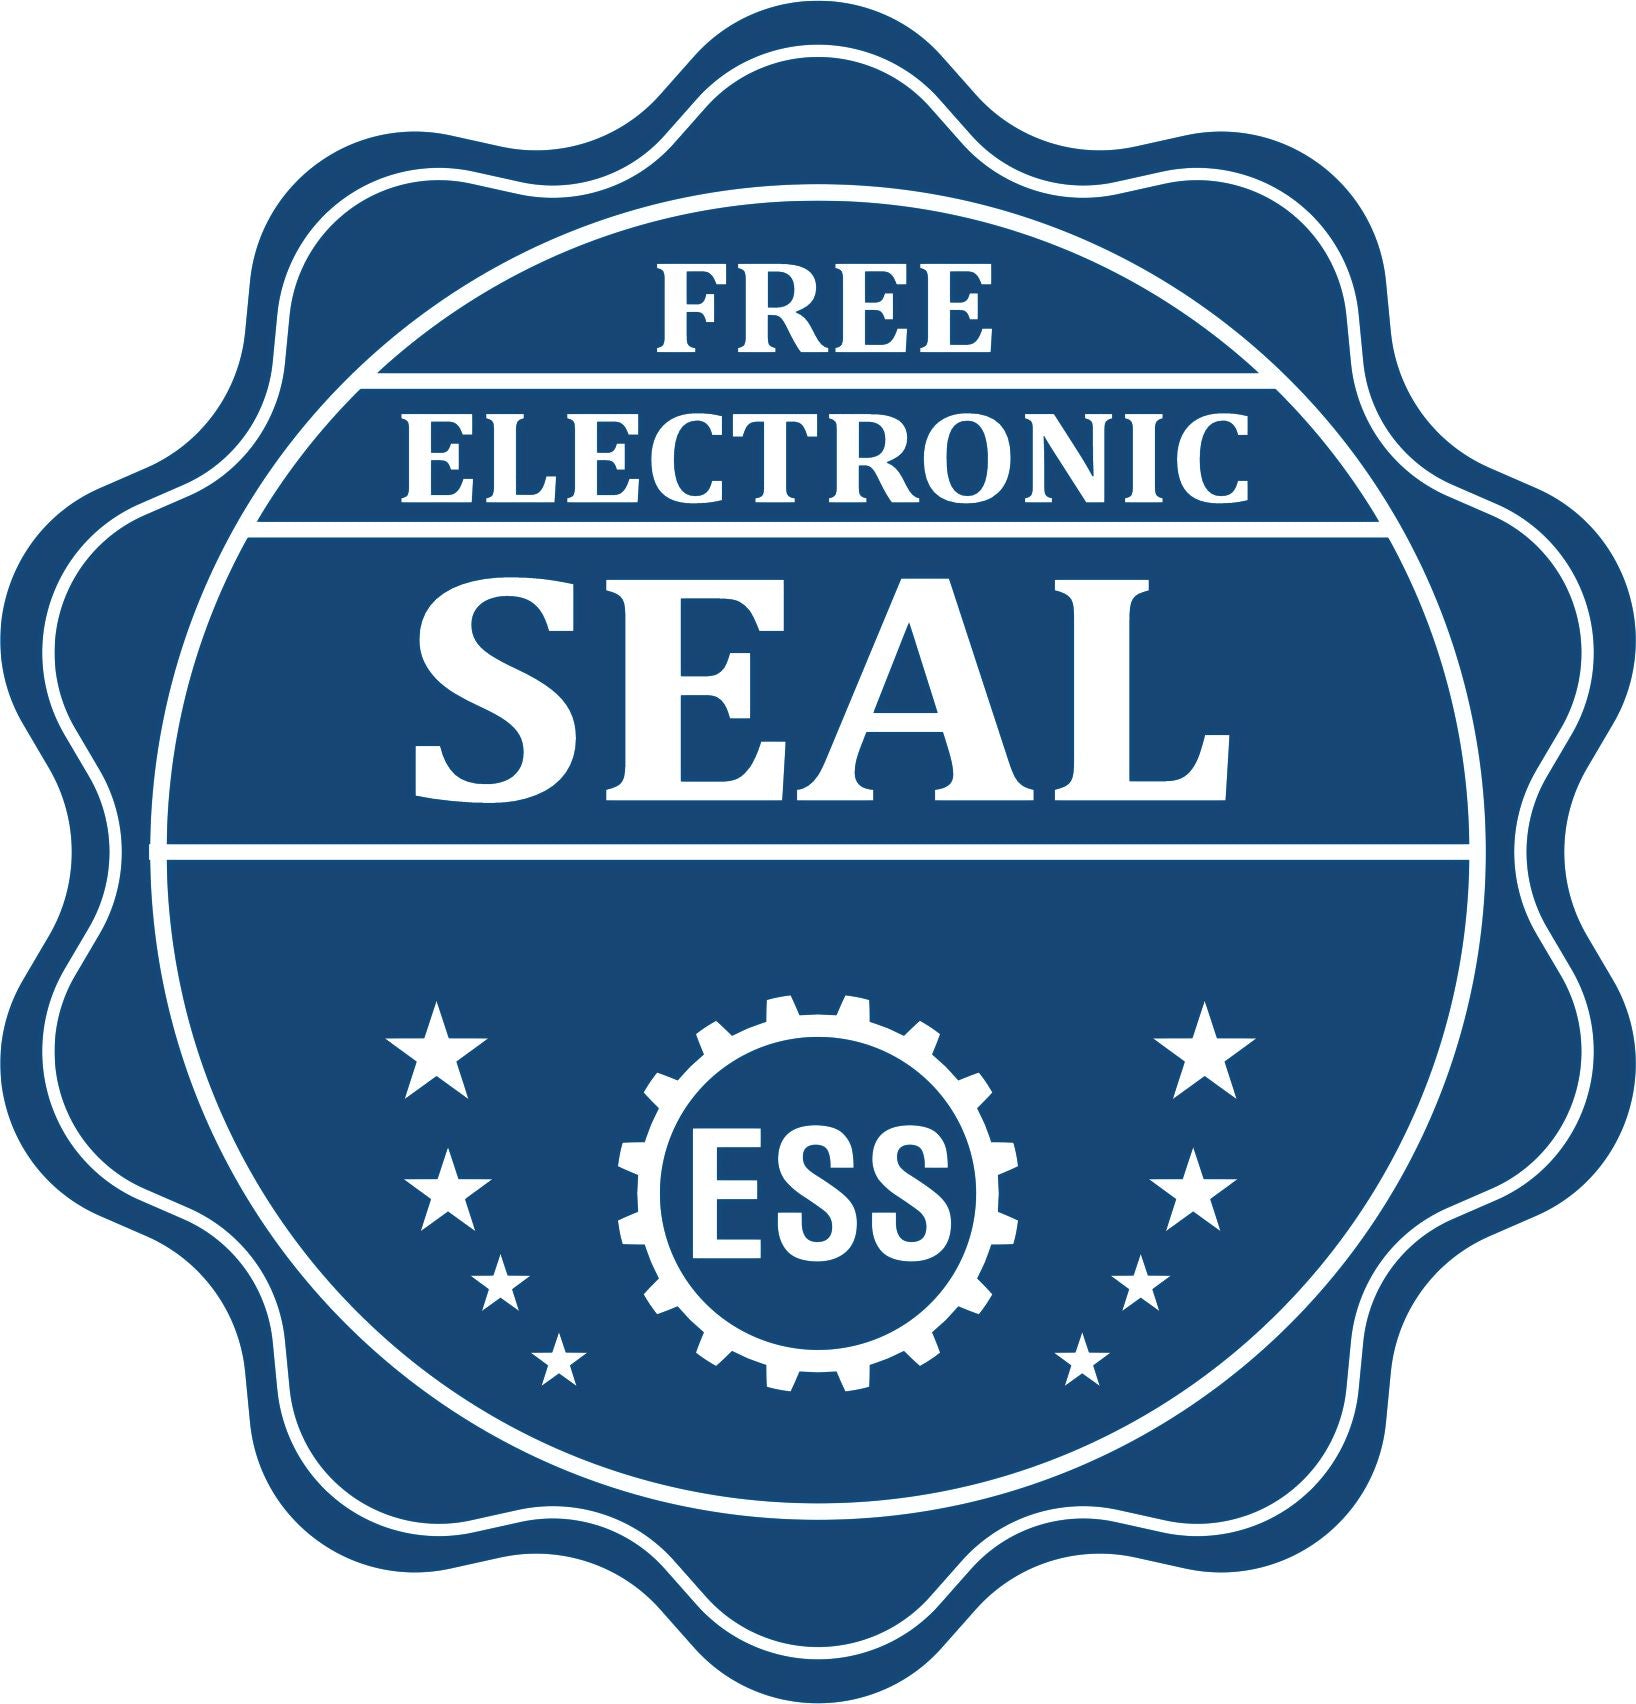 A badge showing a free electronic seal for the State of New Jersey Long Reach Architectural Embossing Seal with stars and the ESS gear on the emblem.